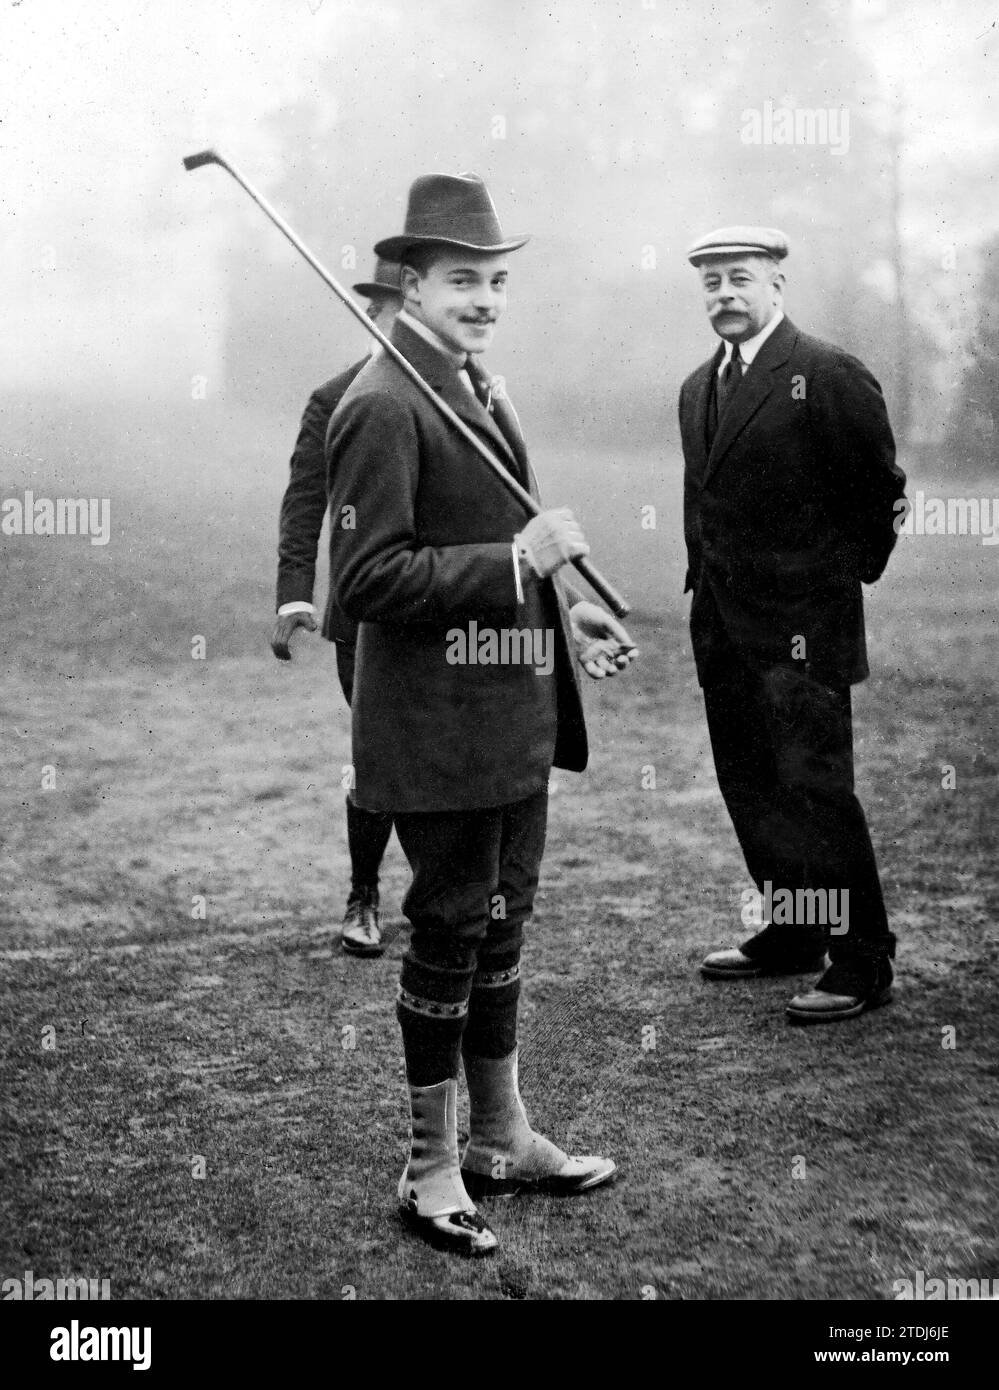 01/31/1911. The King of Portugal in Exile. D. Manuel in the park of Richmond Palace during a game of 'Golf'. On his left is Viscount Bridport (Topical photo). Credit: Album / Archivo ABC / Topical Stock Photo